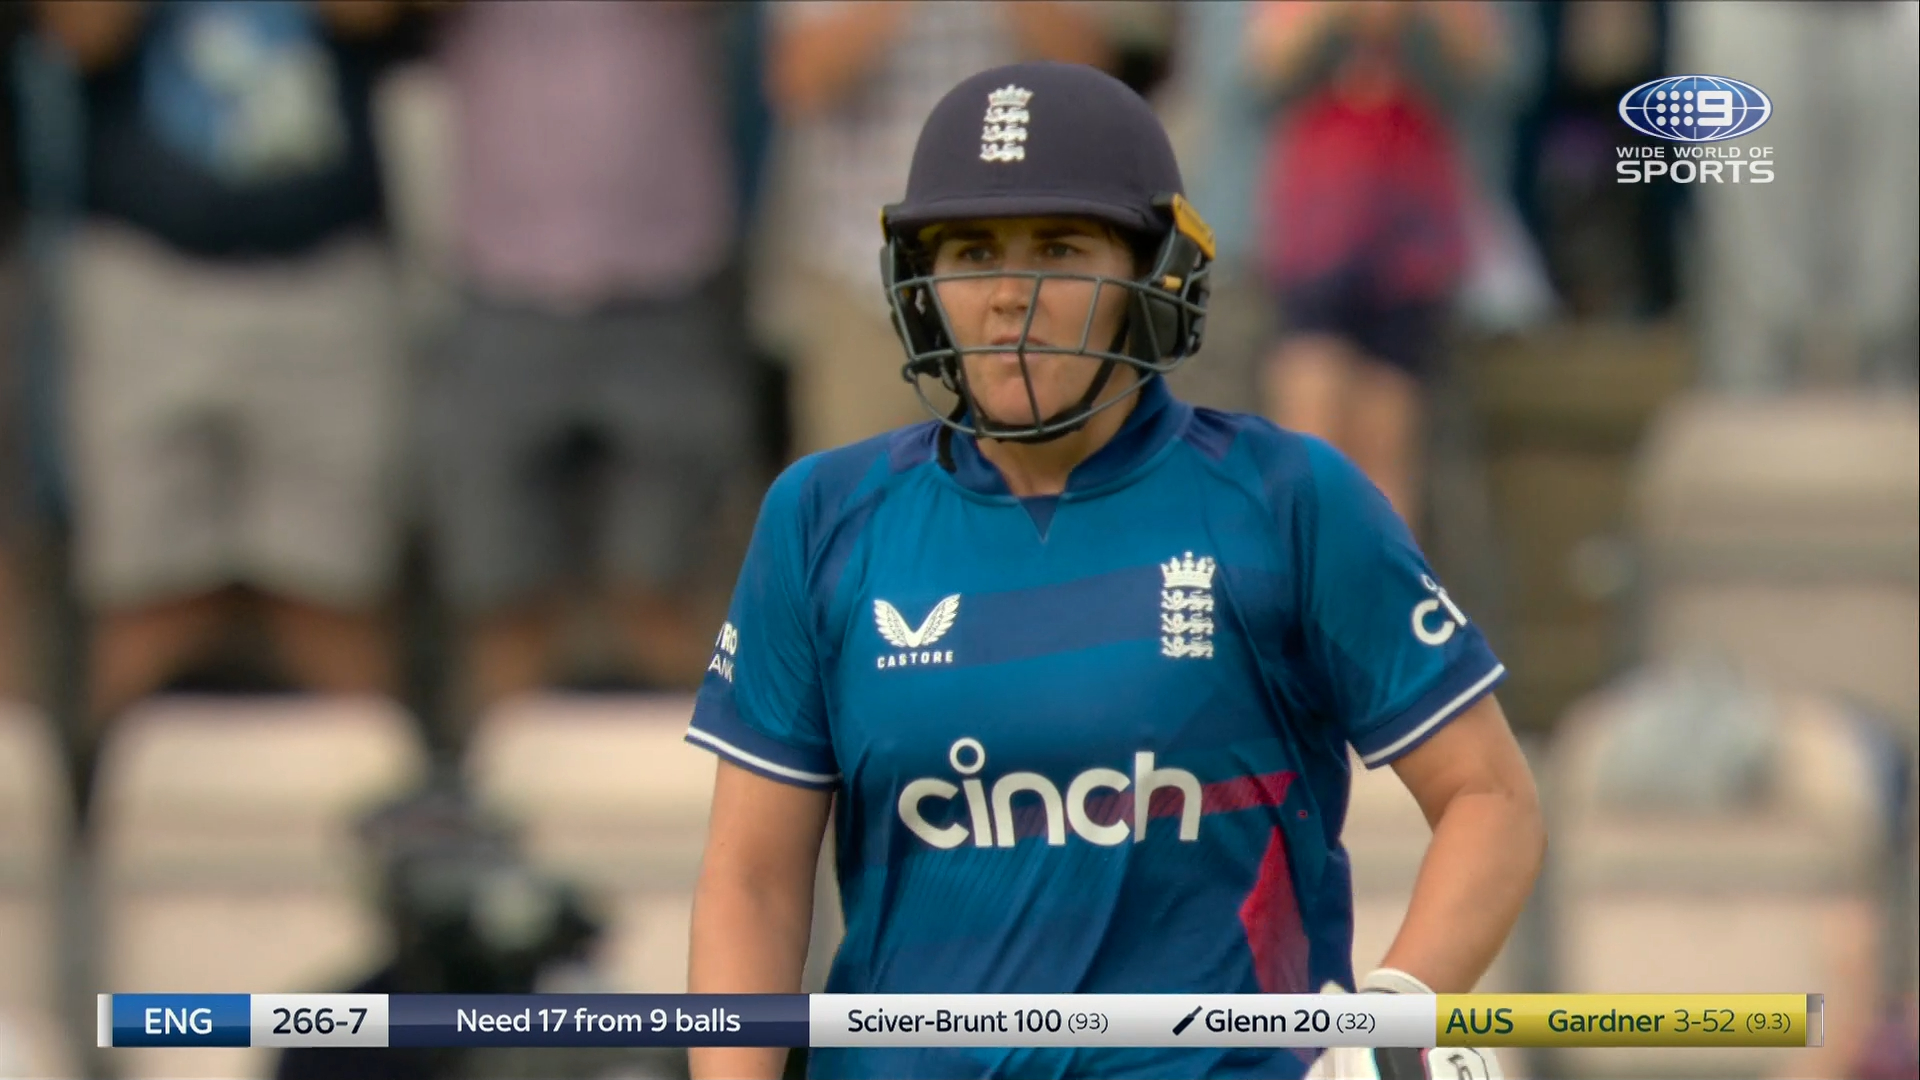 All the highlights from Sciver-Brunt's incredible century